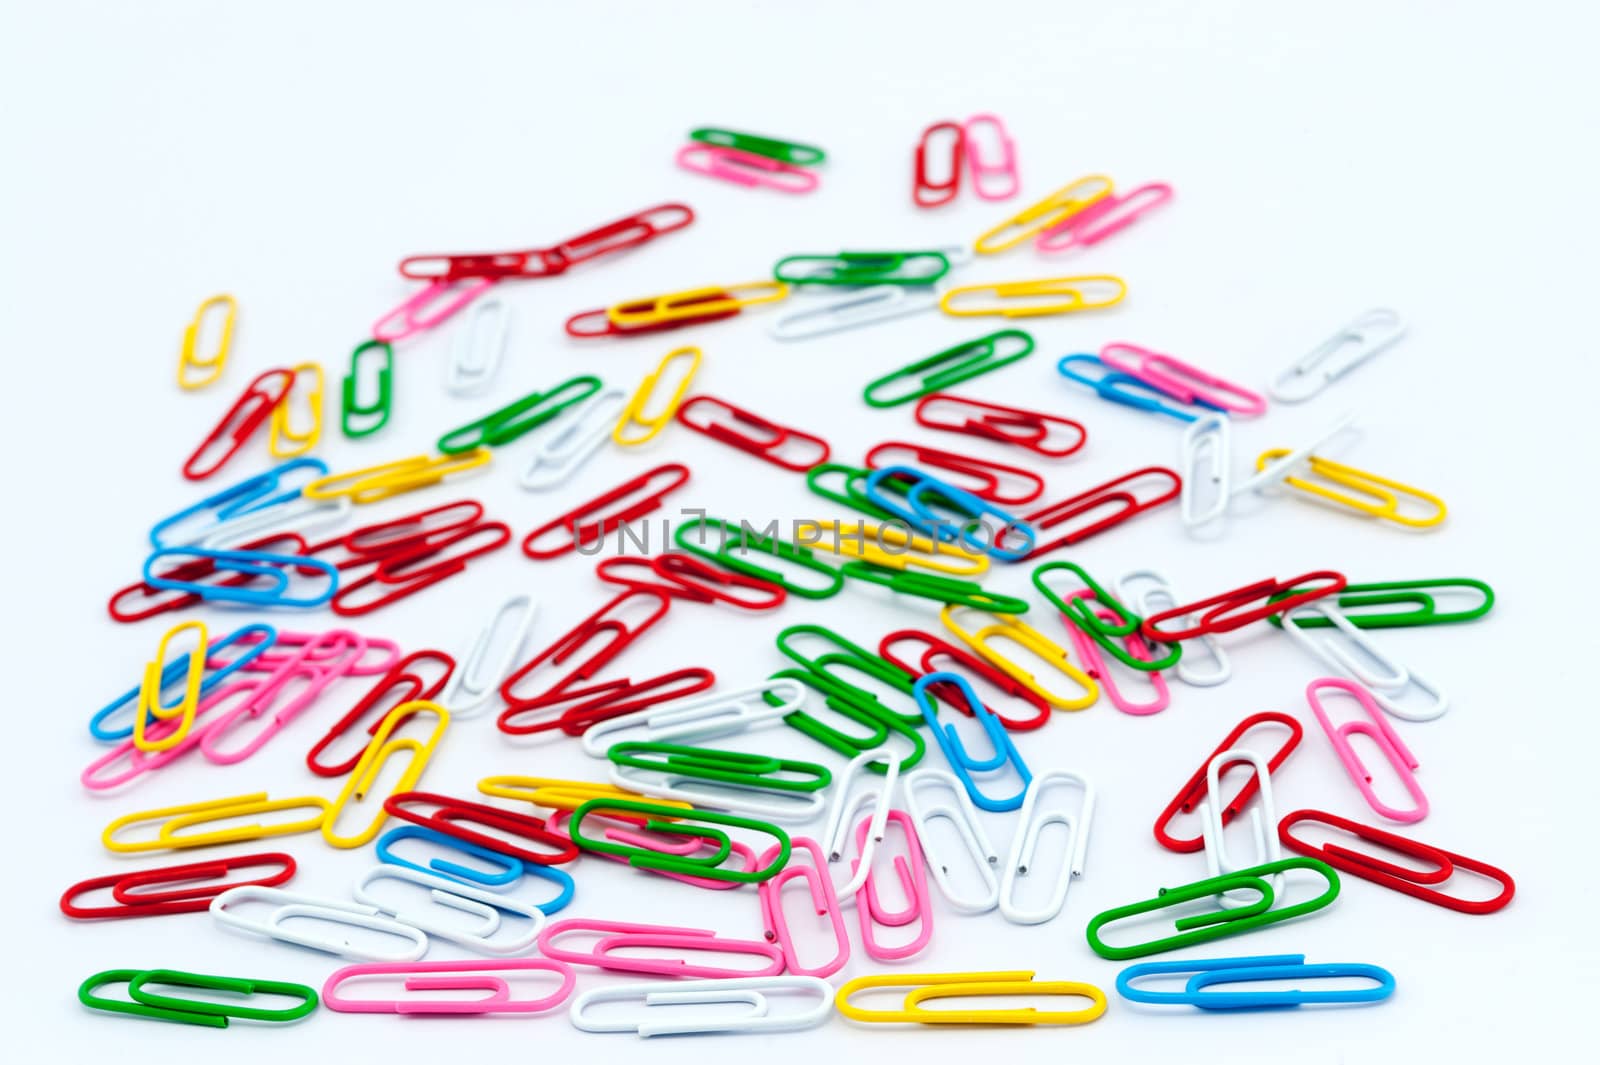 Group of colorful paper clips on white background